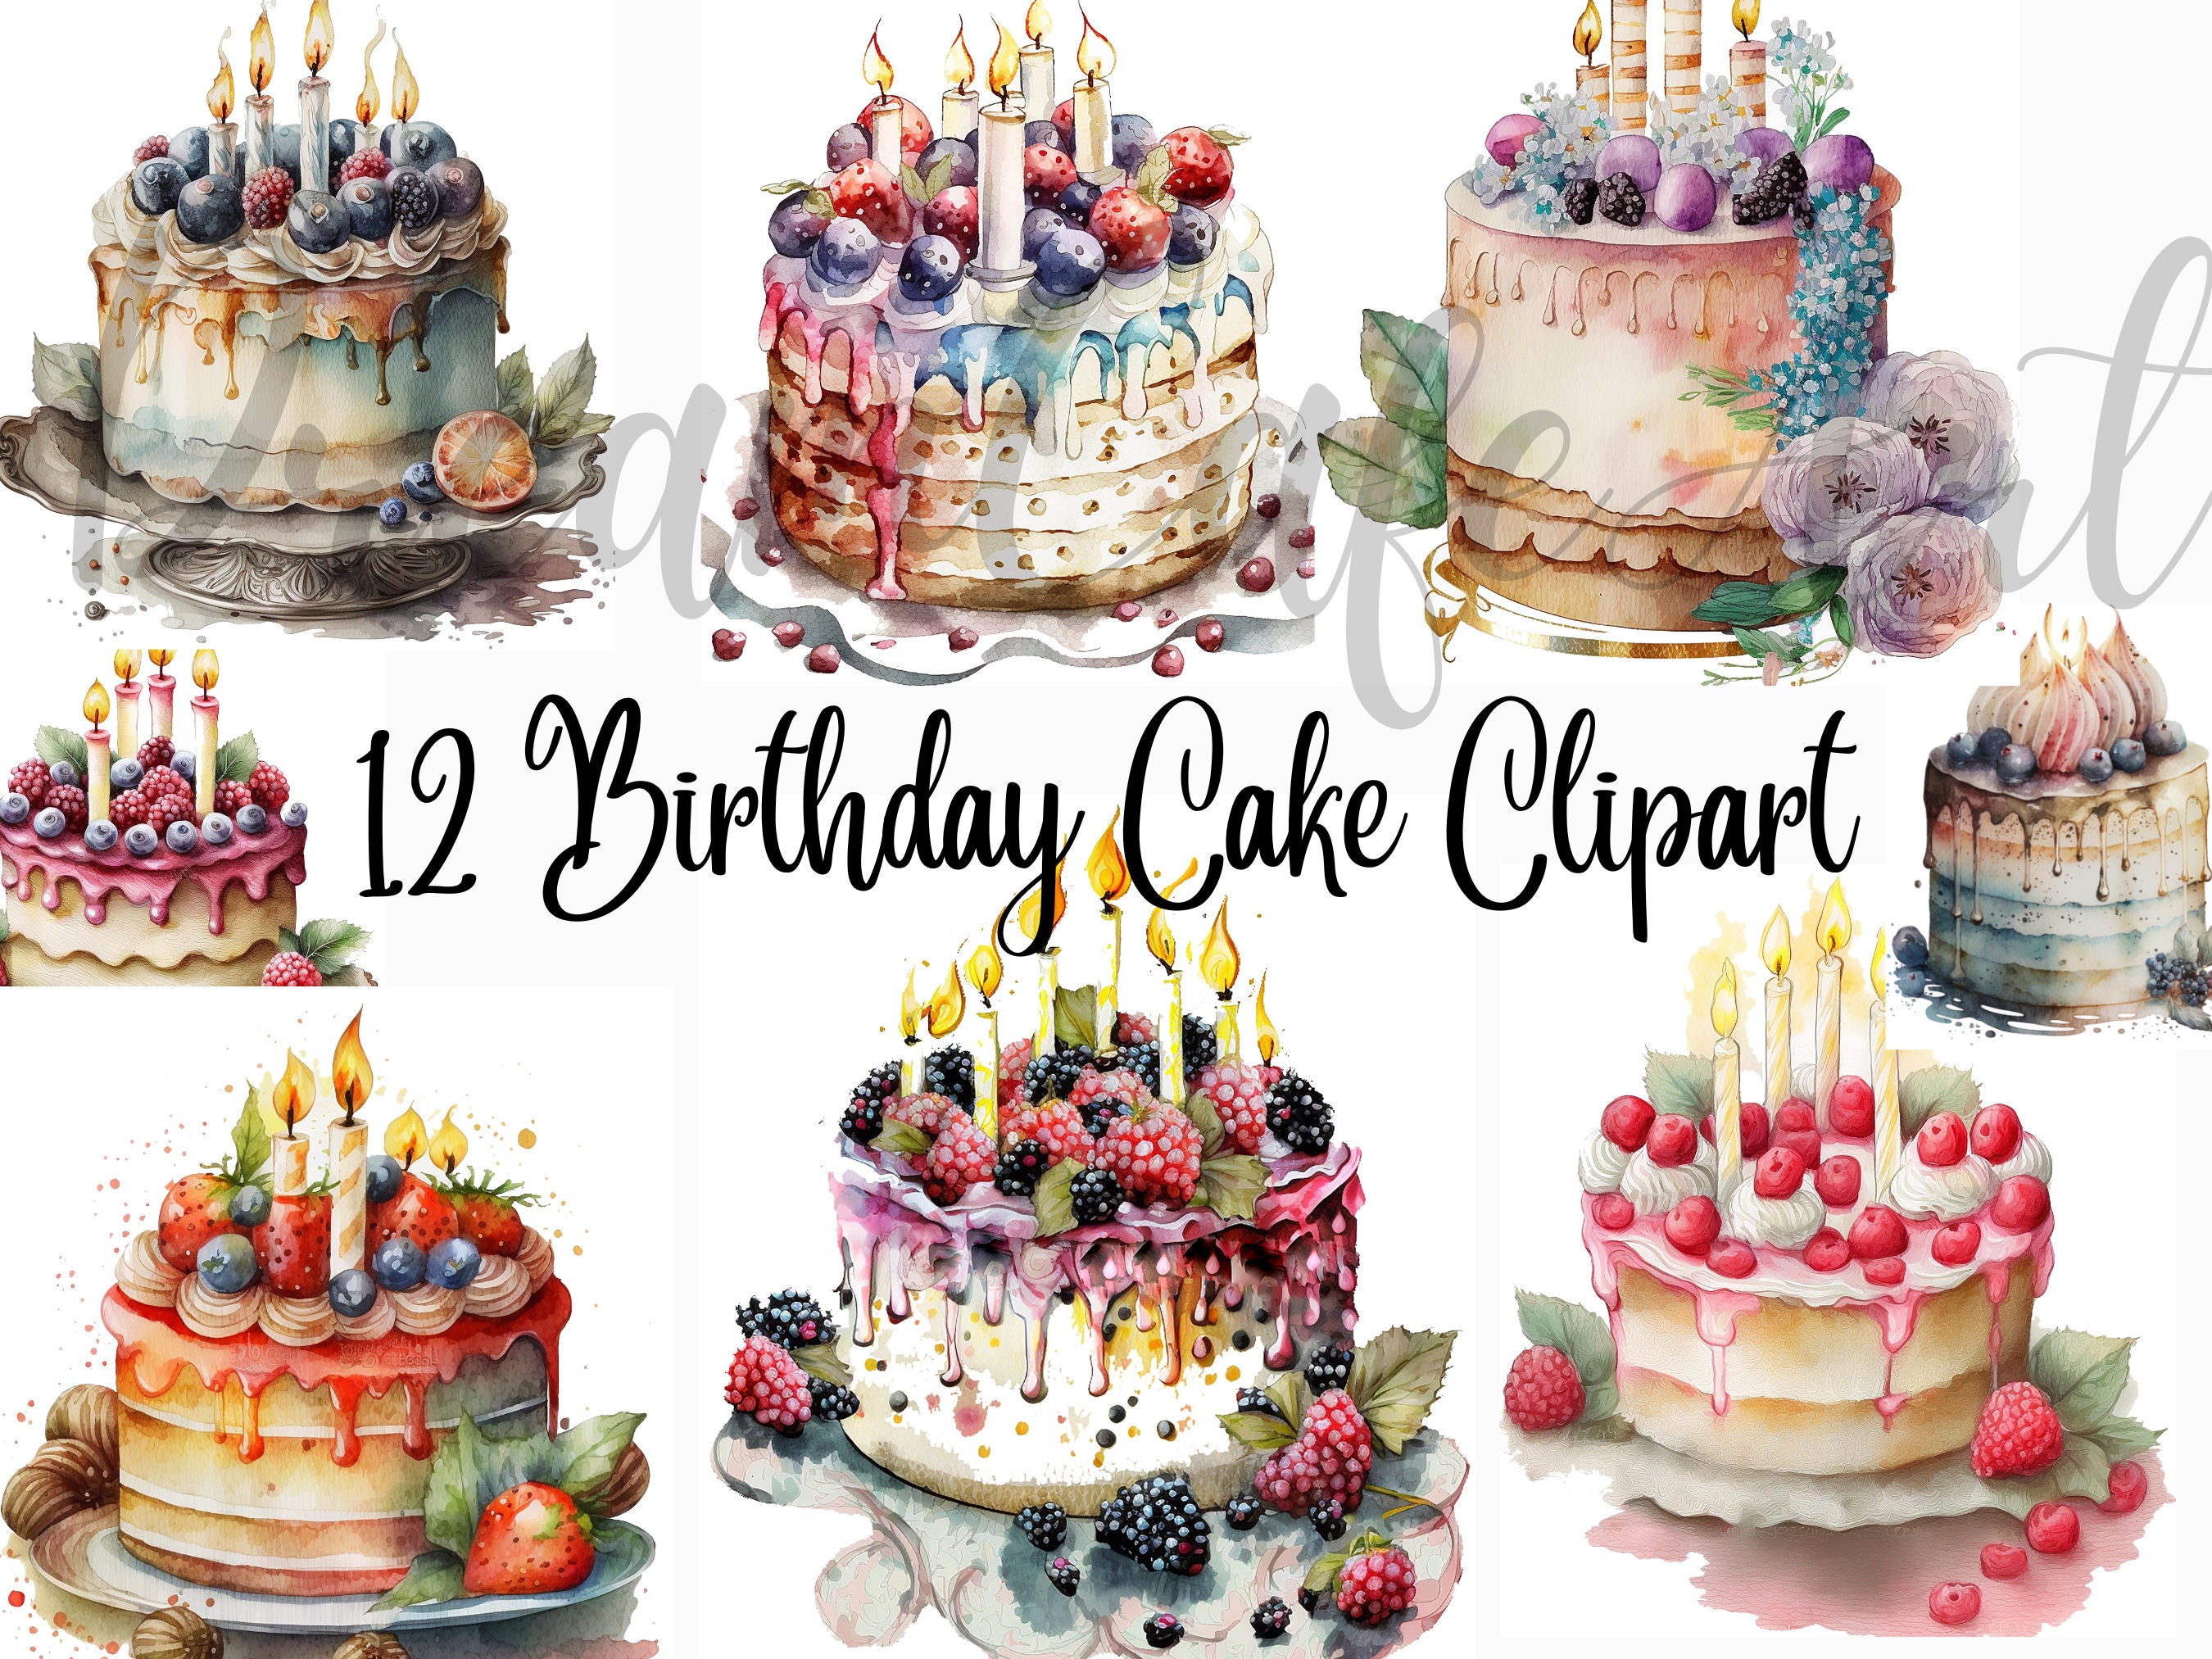 Sugar Cloud Cakes - Cake Designer, Nantwich, Crewe, Cheshire | A Bright and  Colourful 100th Birthday Cake for Hilary